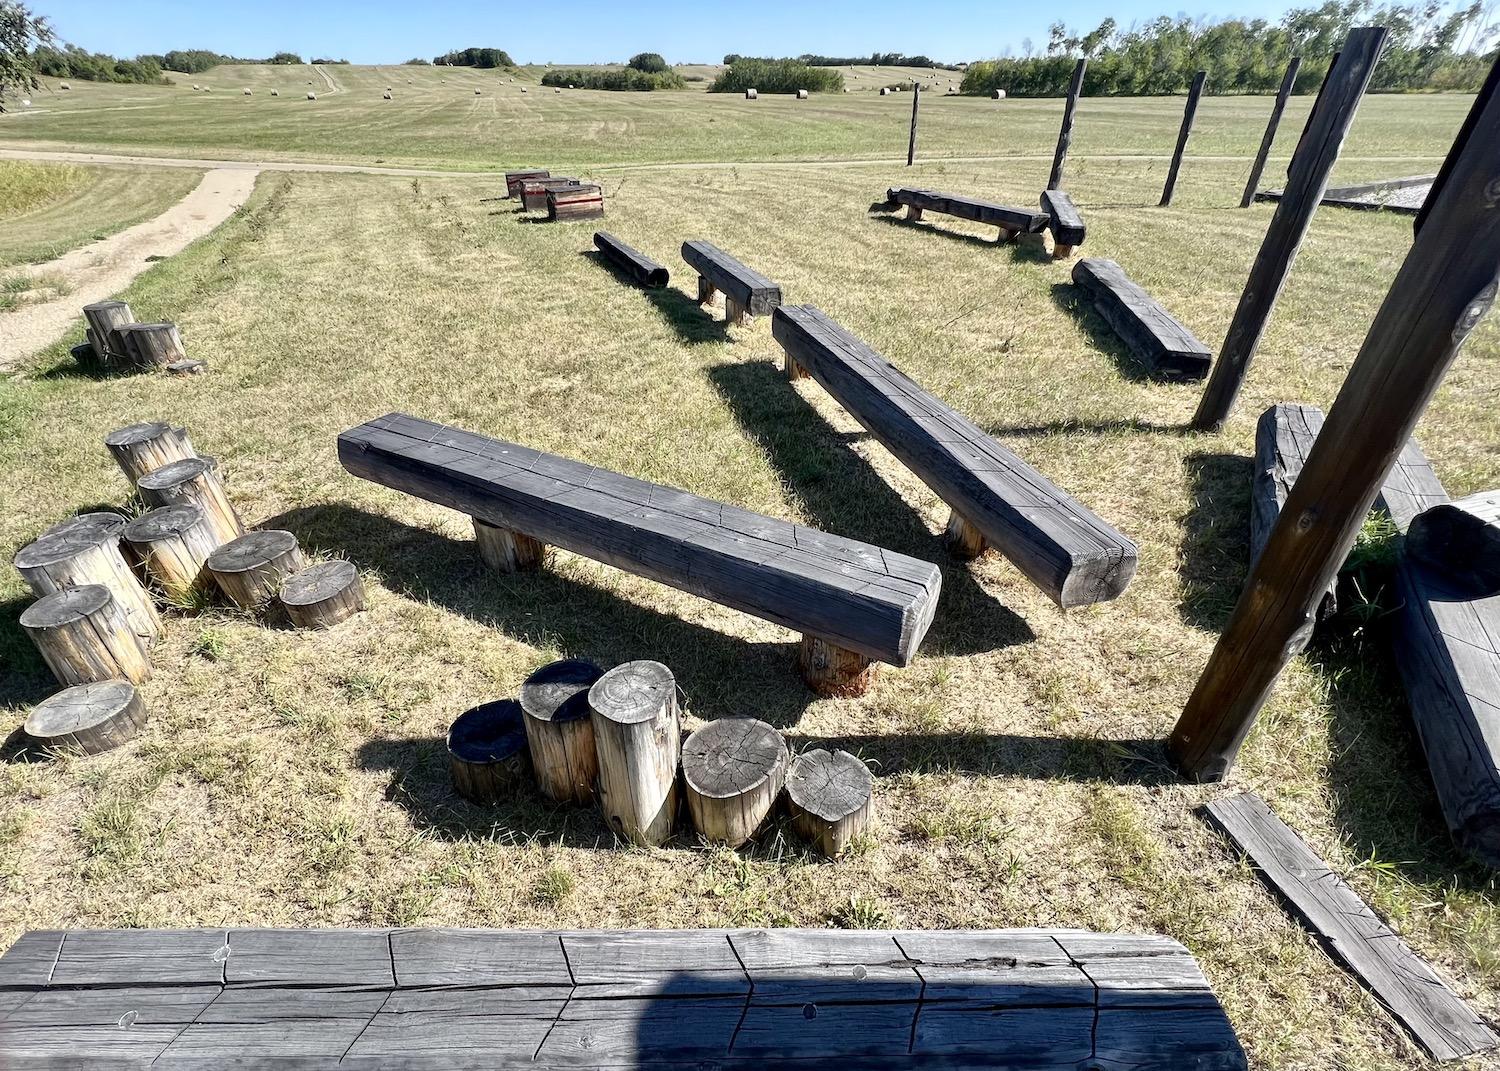 An imaginative East Village playground at Batoche mimics trade routes.